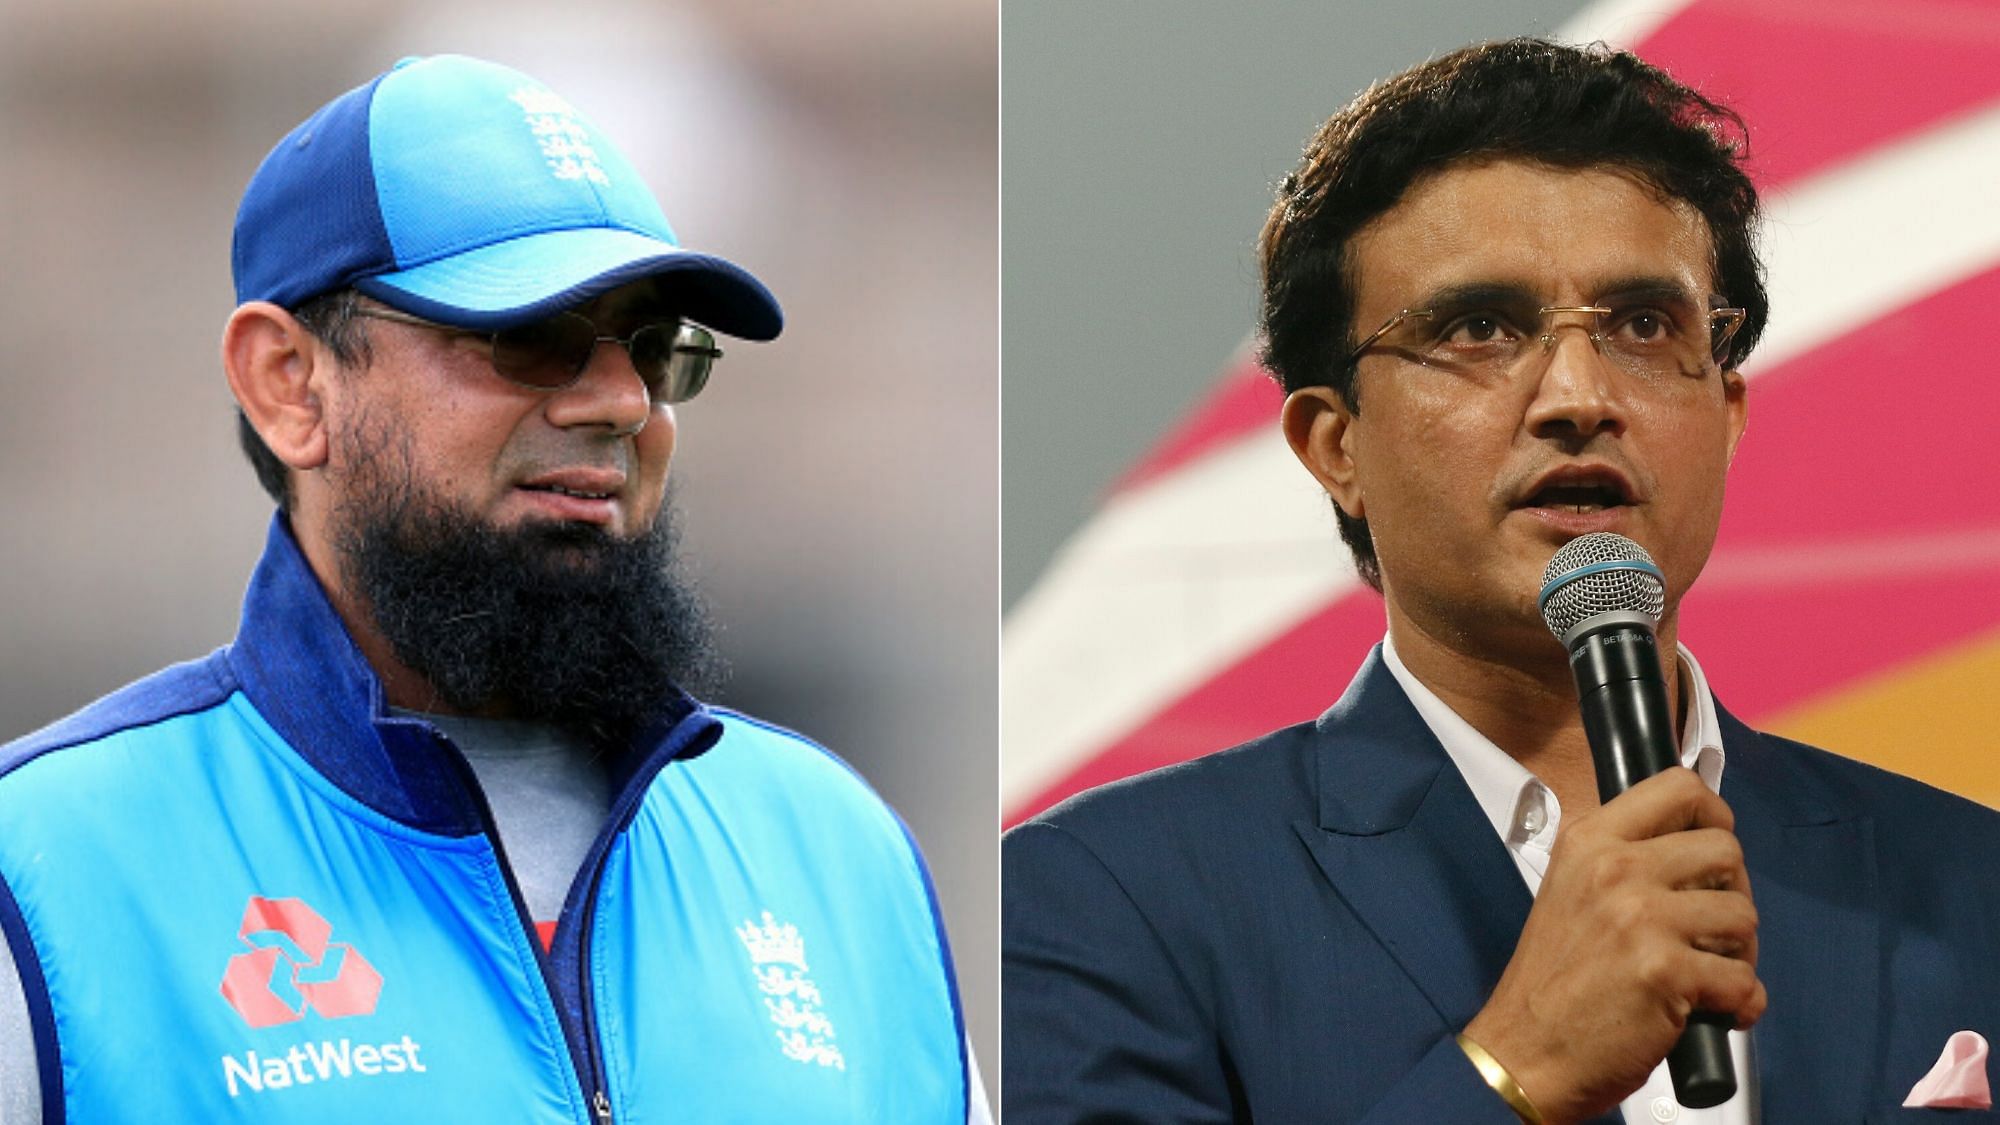 Pakistan spin legend Saqlain Mushtaq hailed former India captain Sourav Ganguly on his current role as president of the Board of Control for Cricket in India. 